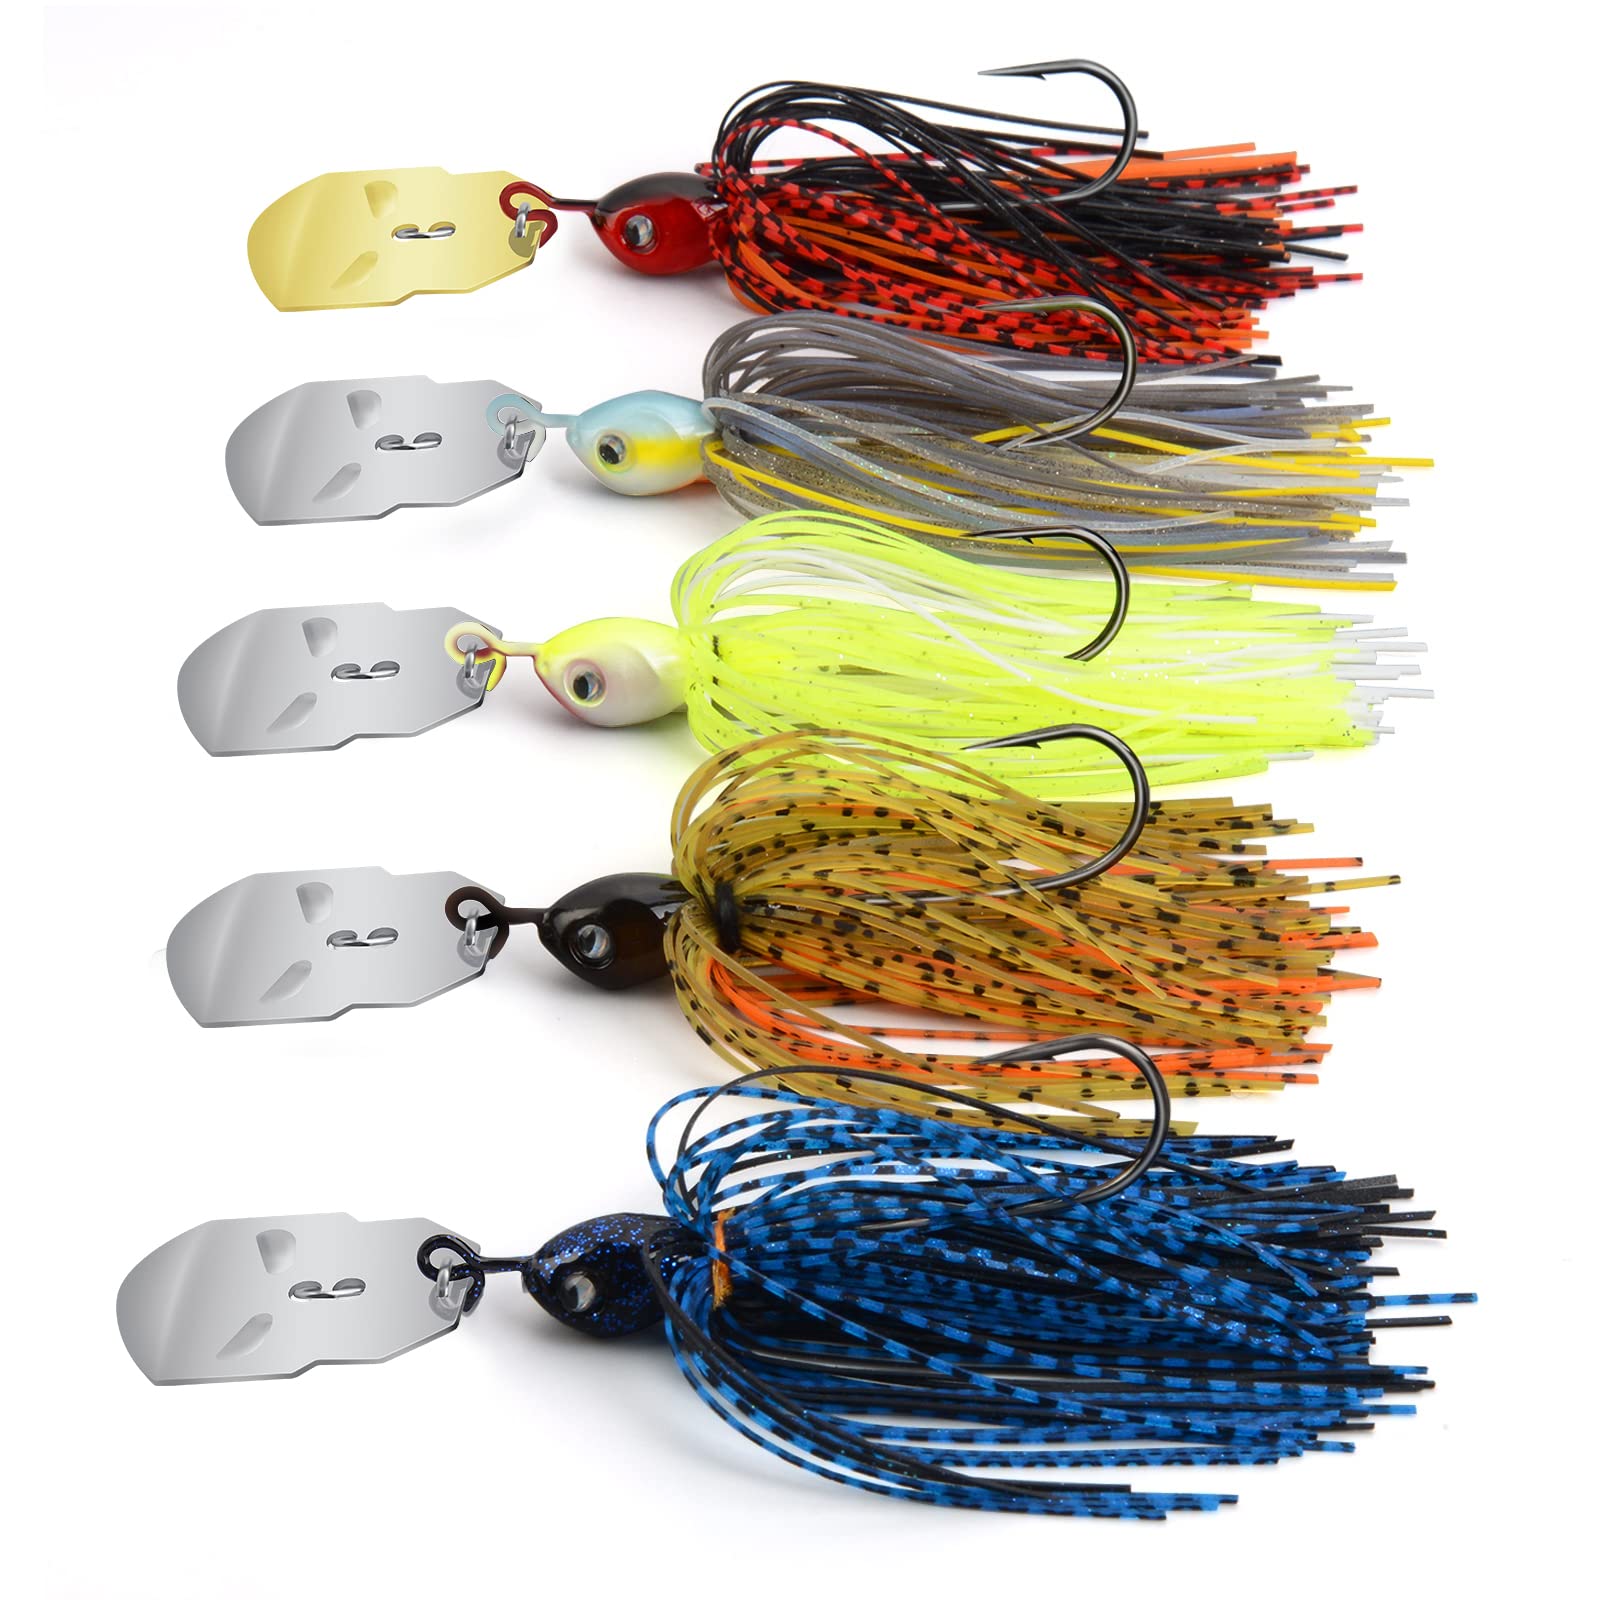 MadBite Bladed Jig Fishing Lures 5 pc and 3 pc Multi-Color Kits